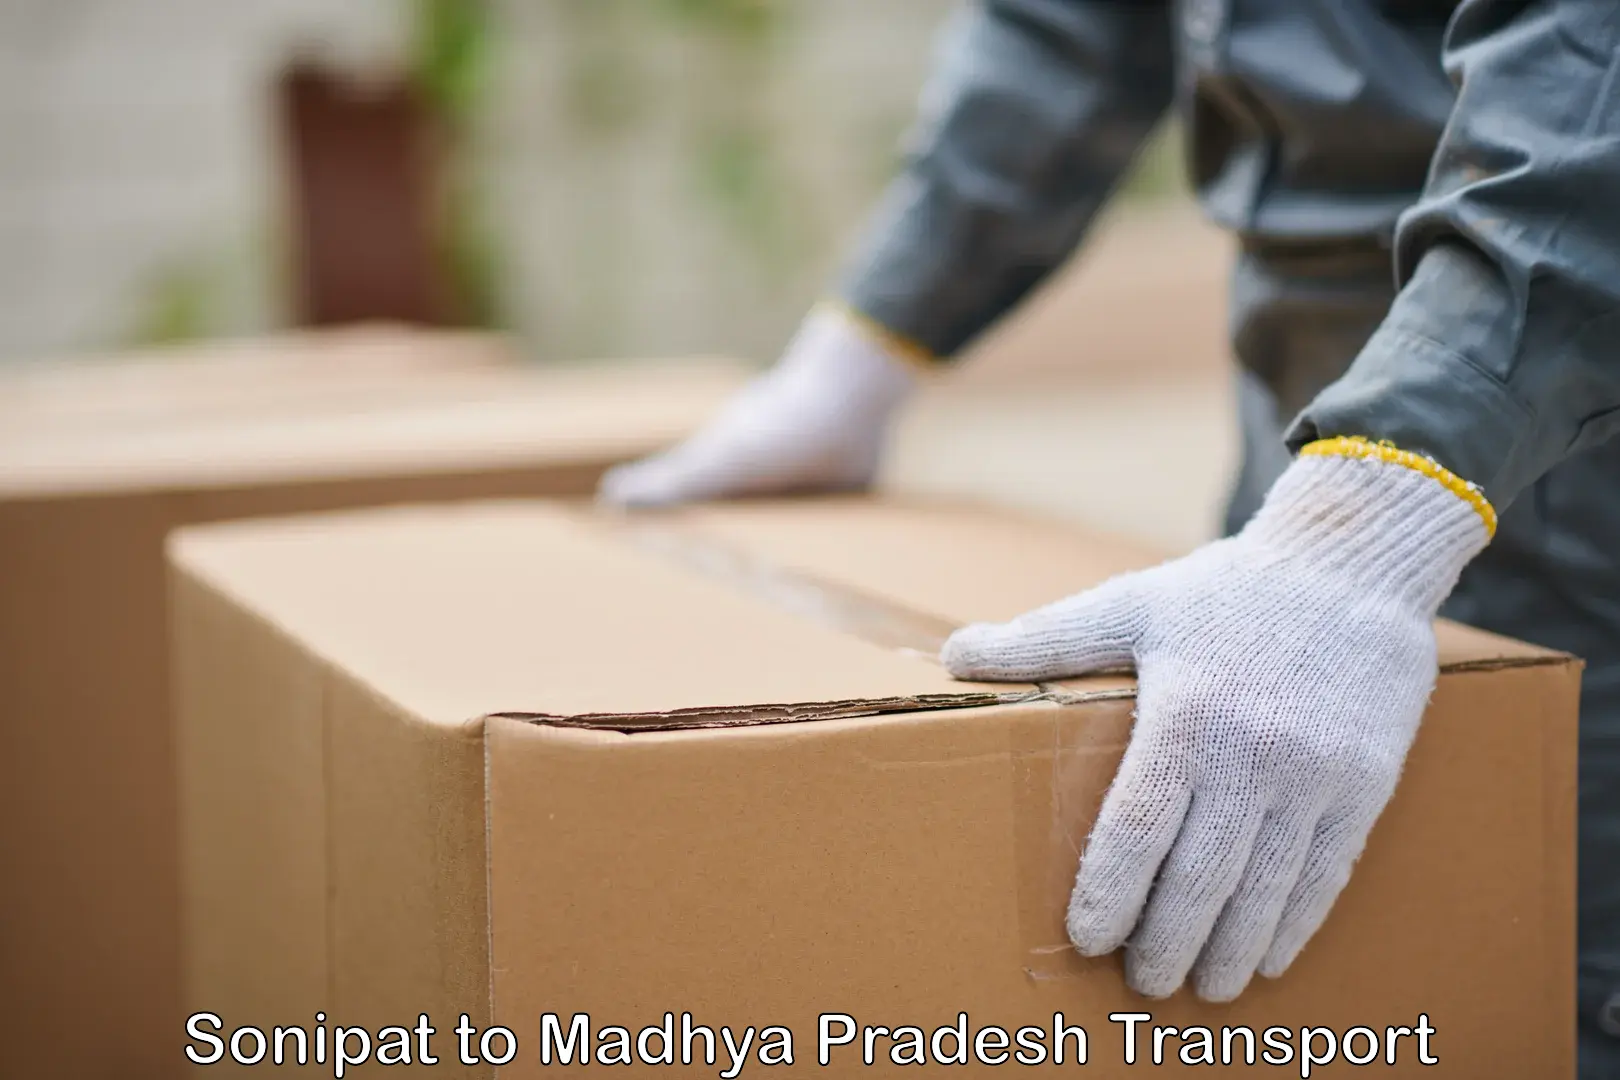 Express transport services Sonipat to Harda